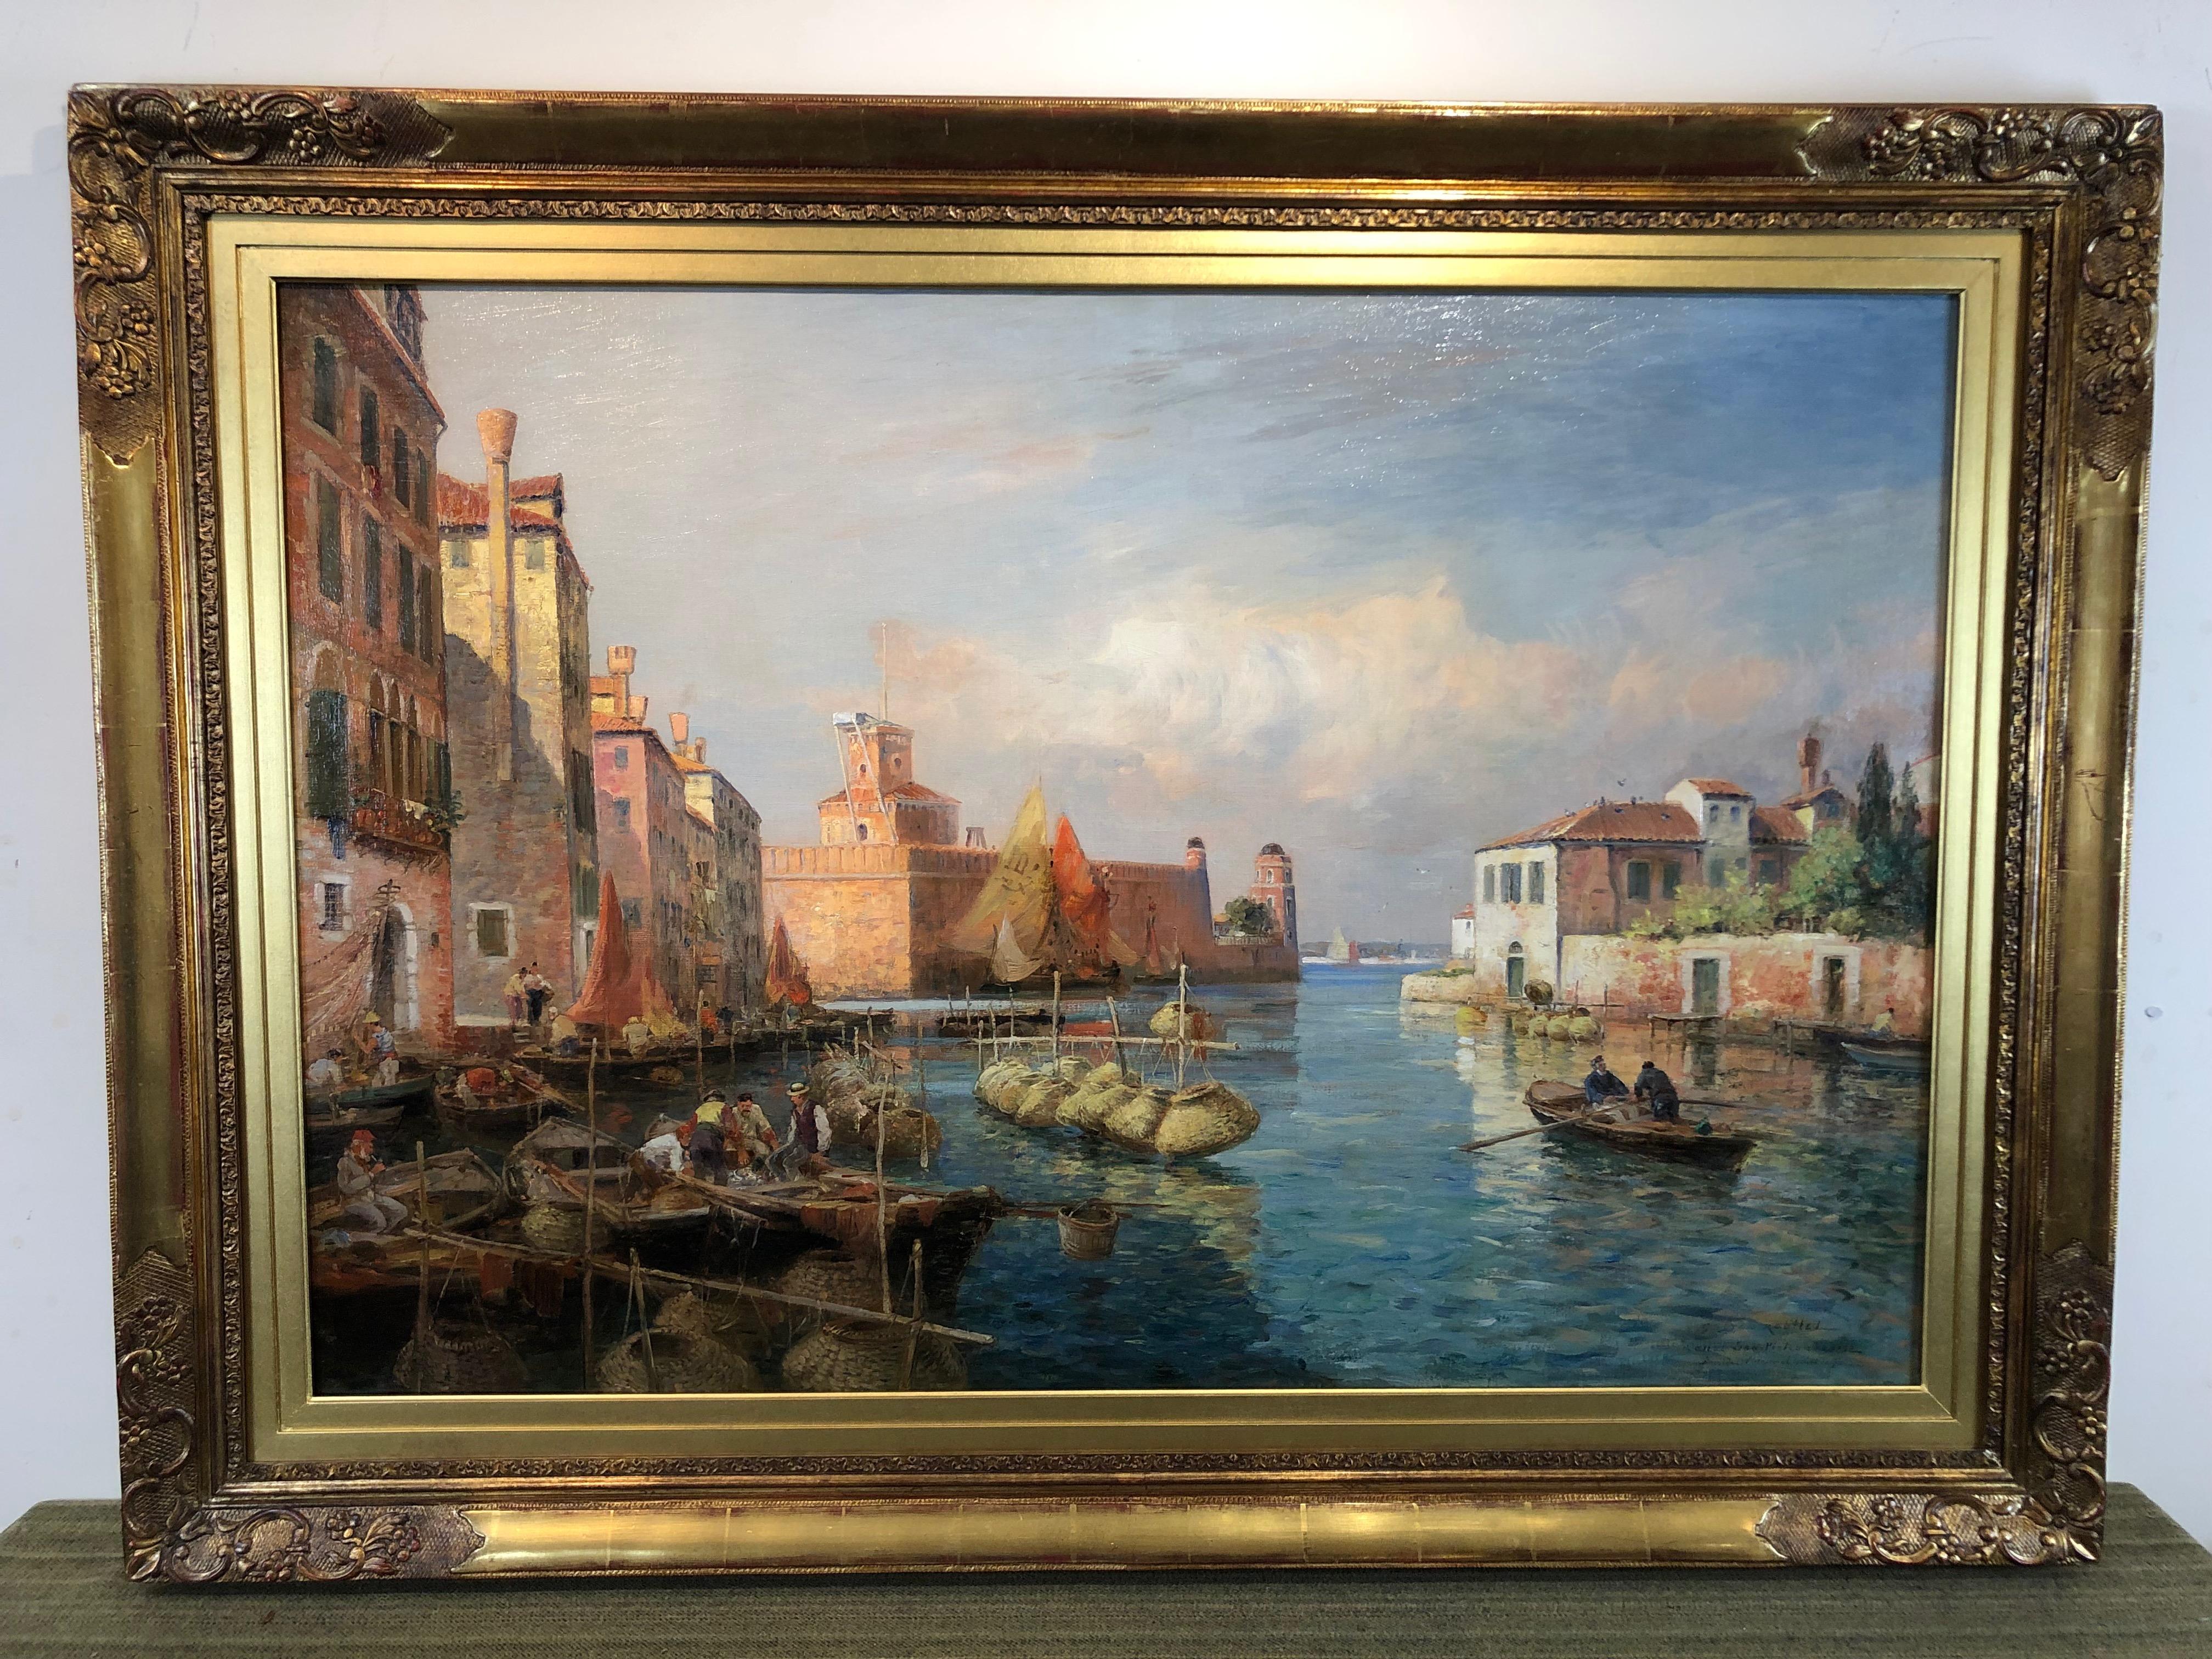 Canal San Pietro, Pont du Guerre, Back of the Arsenal, Venice - Painting by Gaston Roullet